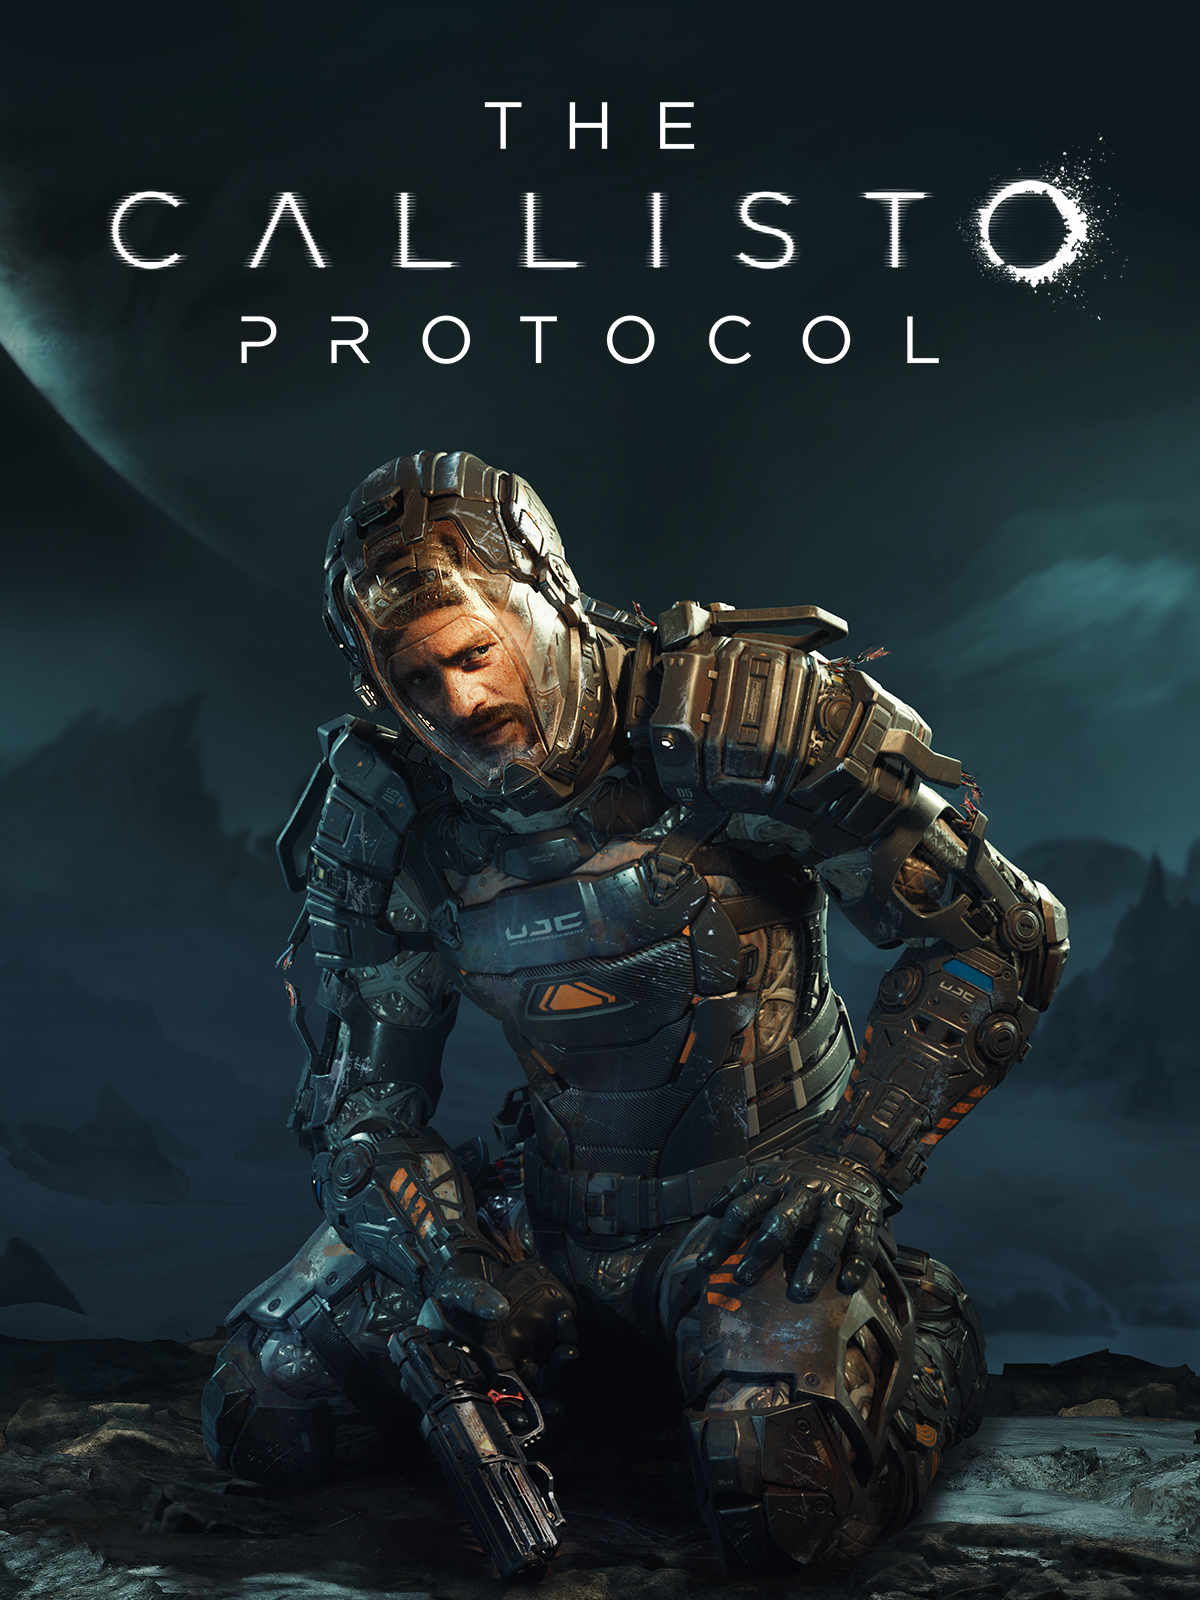 The Callisto Protocol pre-orders started to be canceled after the news about the sale of the death animations of the protagonist - Games, Monetization, Dead space, Survival Horror, Space, Horror, Computer games